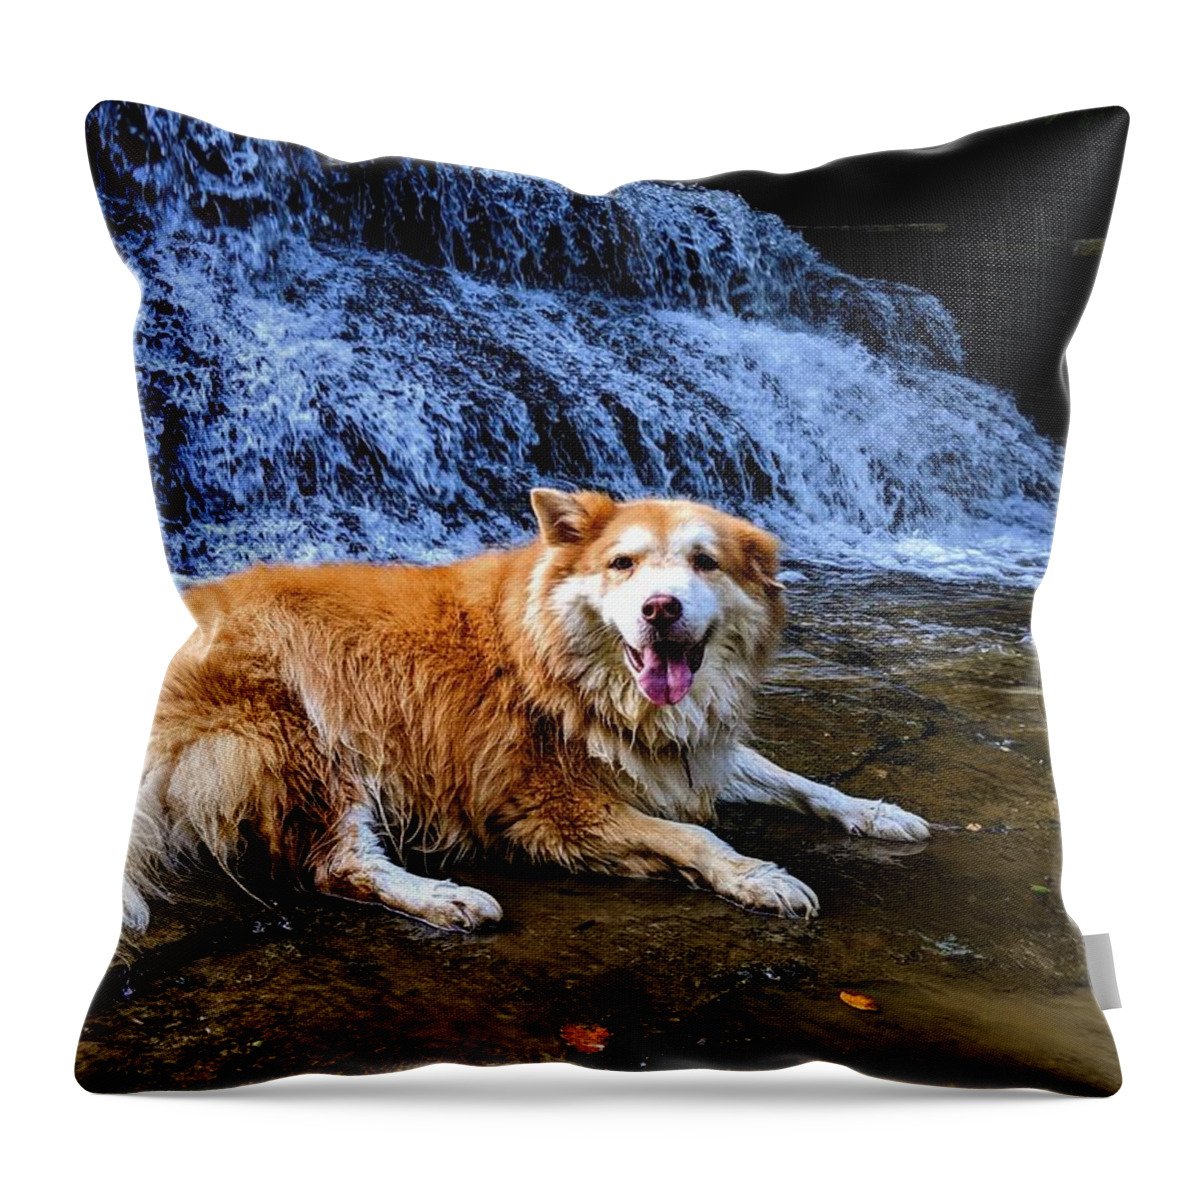  Throw Pillow featuring the photograph Waterfall Doggy by Brad Nellis